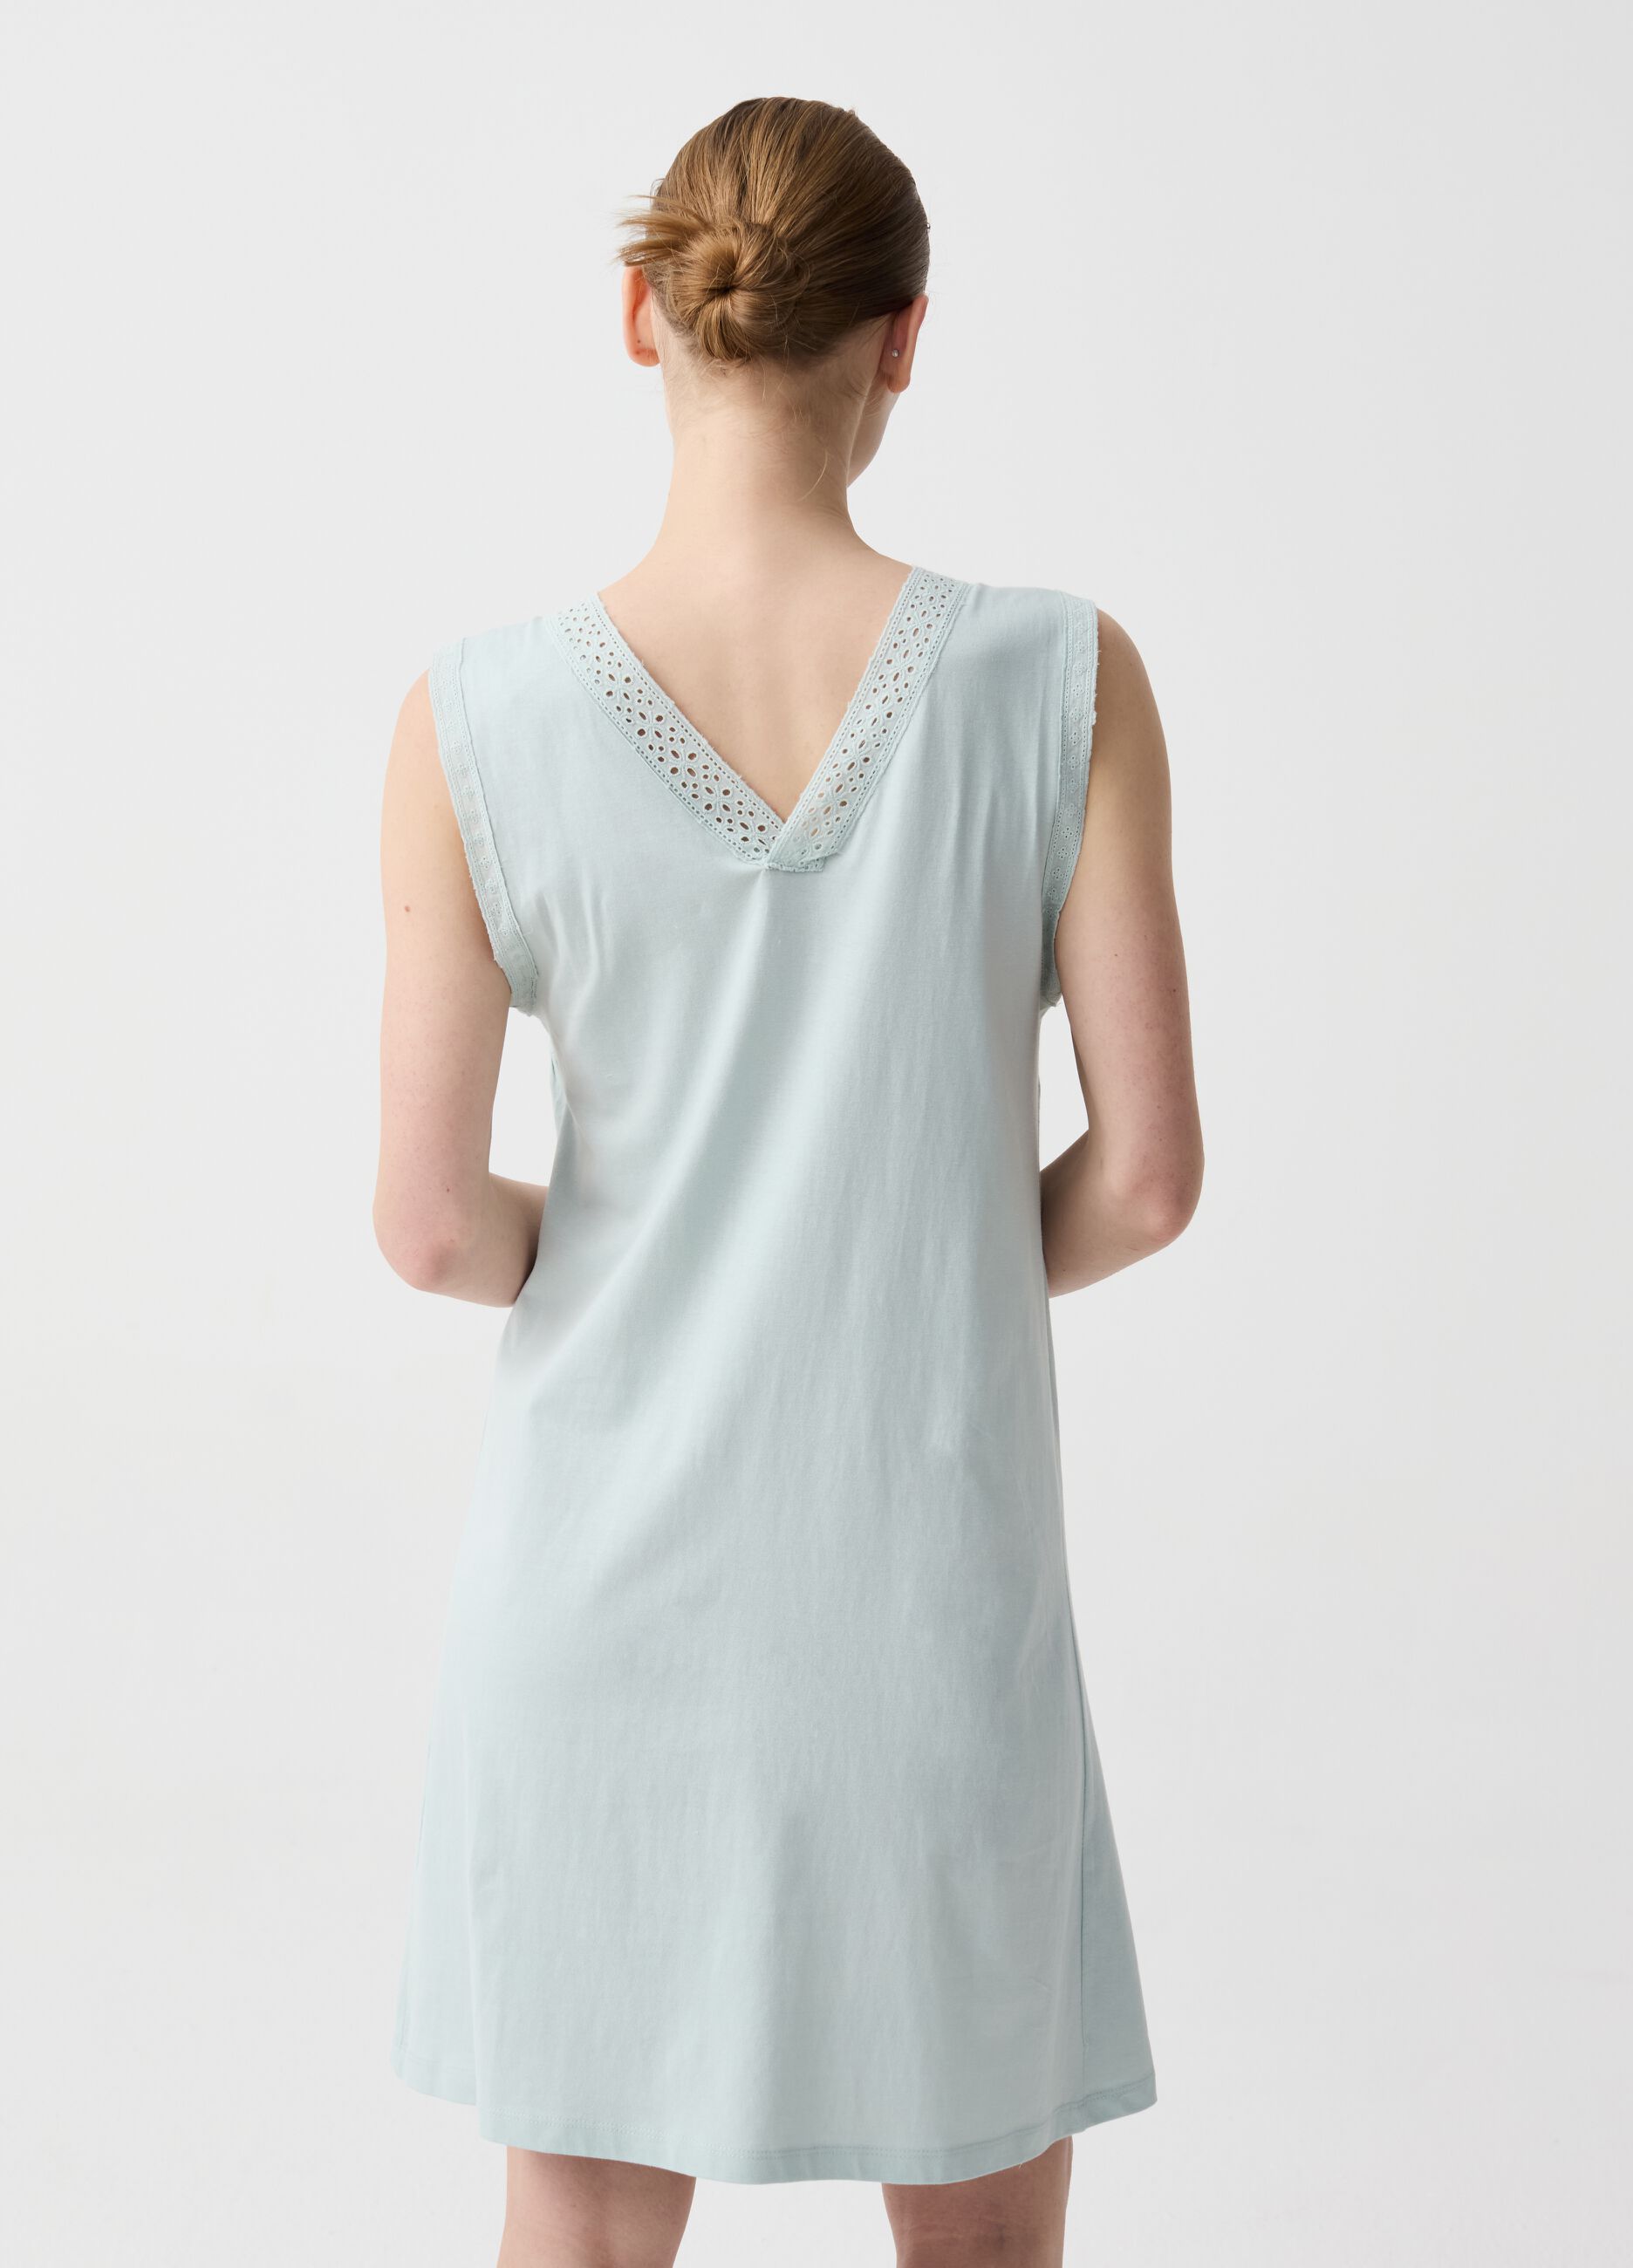 Nightdress with V neck and broderie anglaise